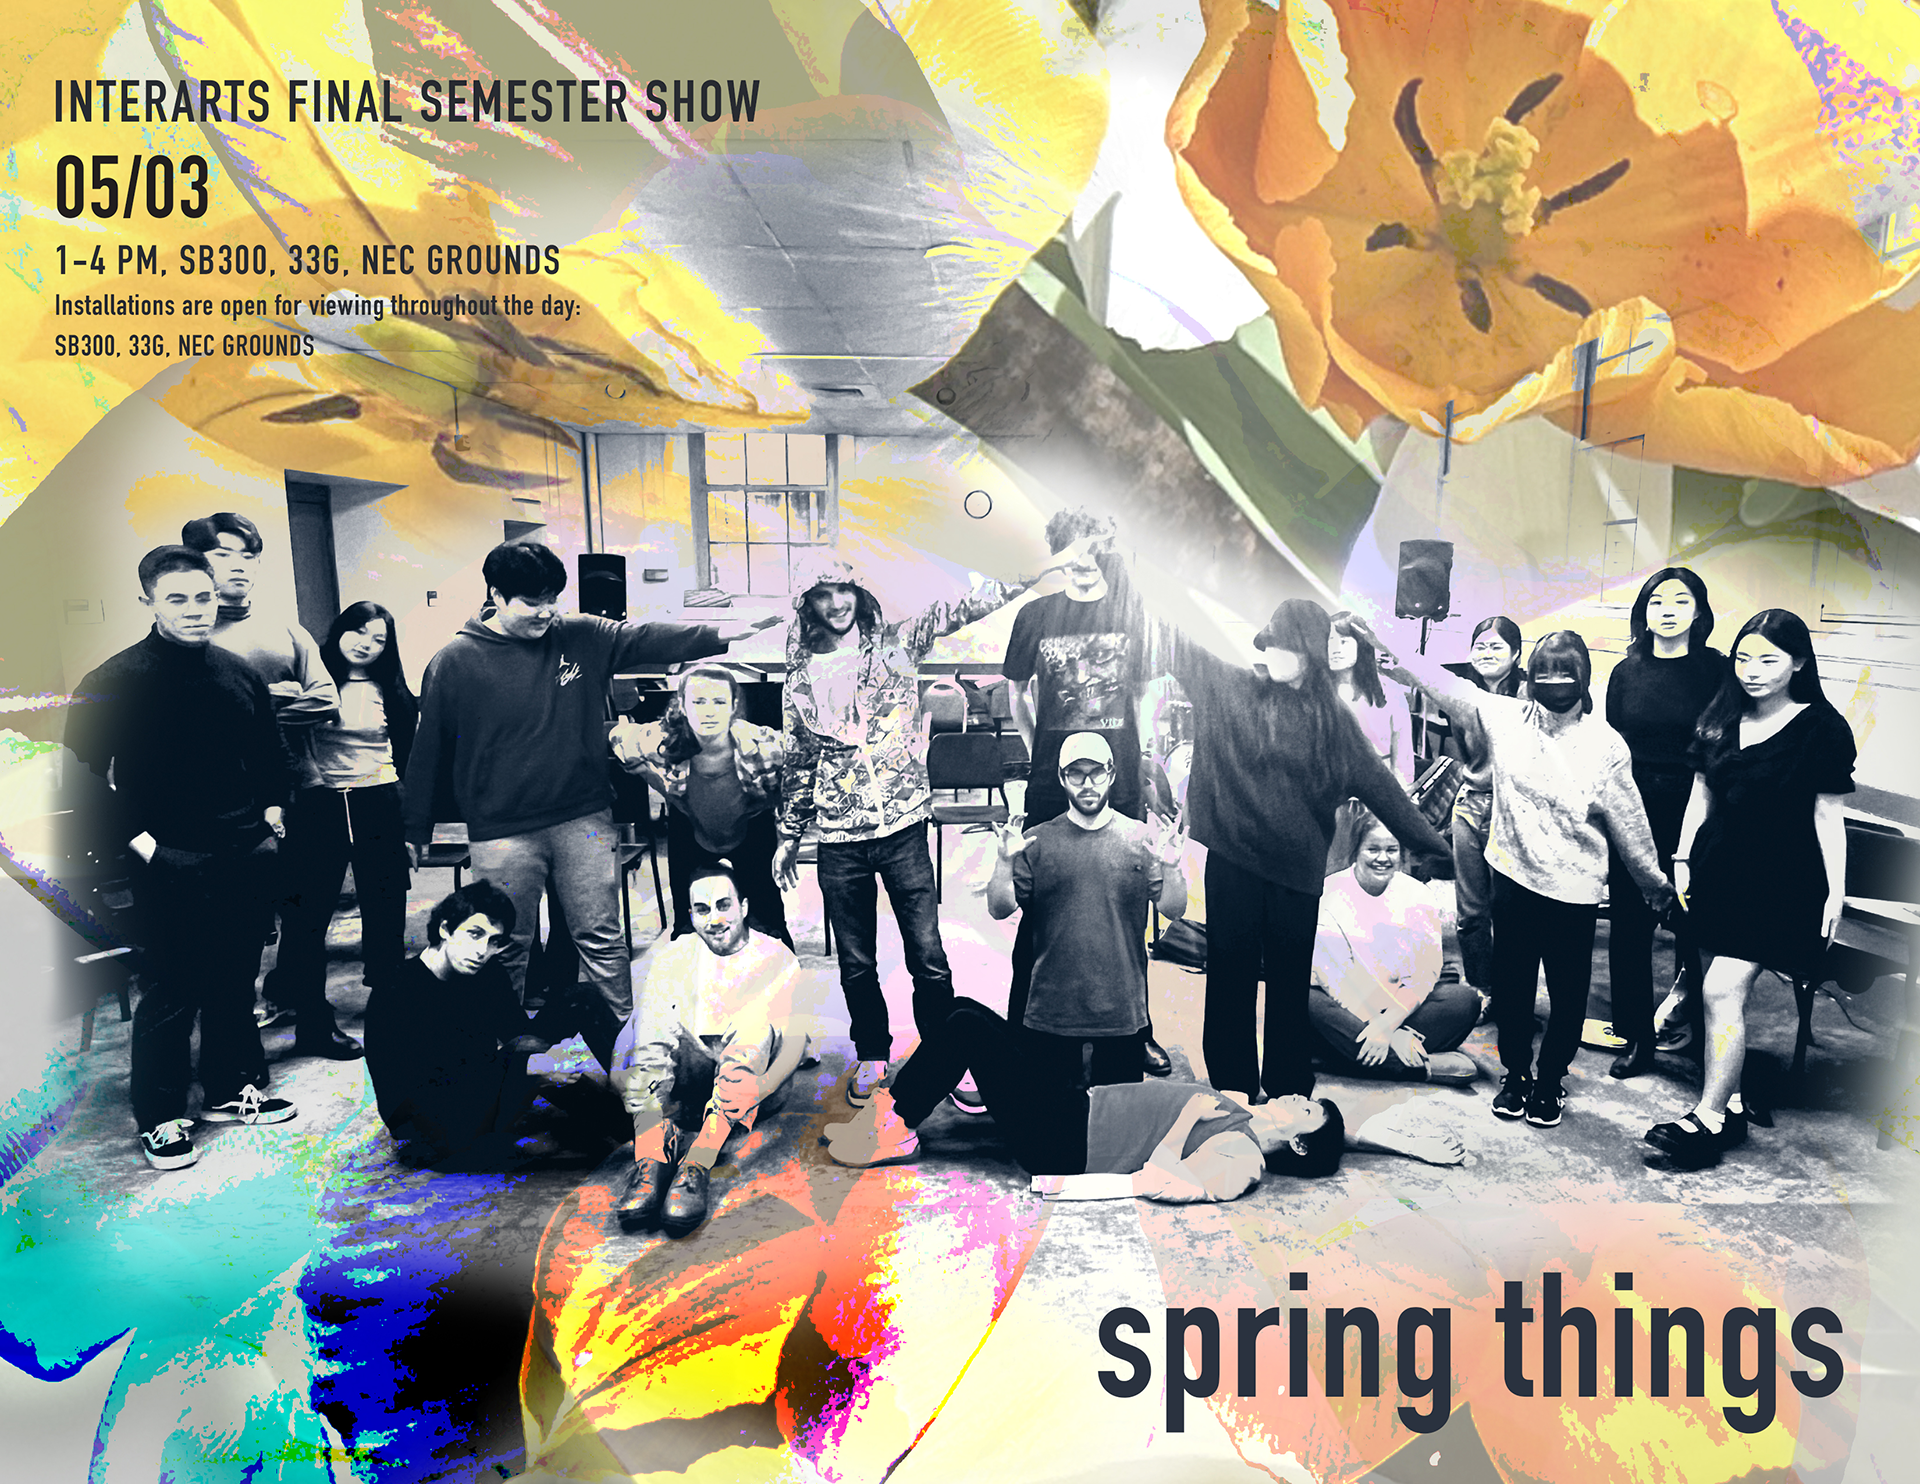 Spring Things promotional poster